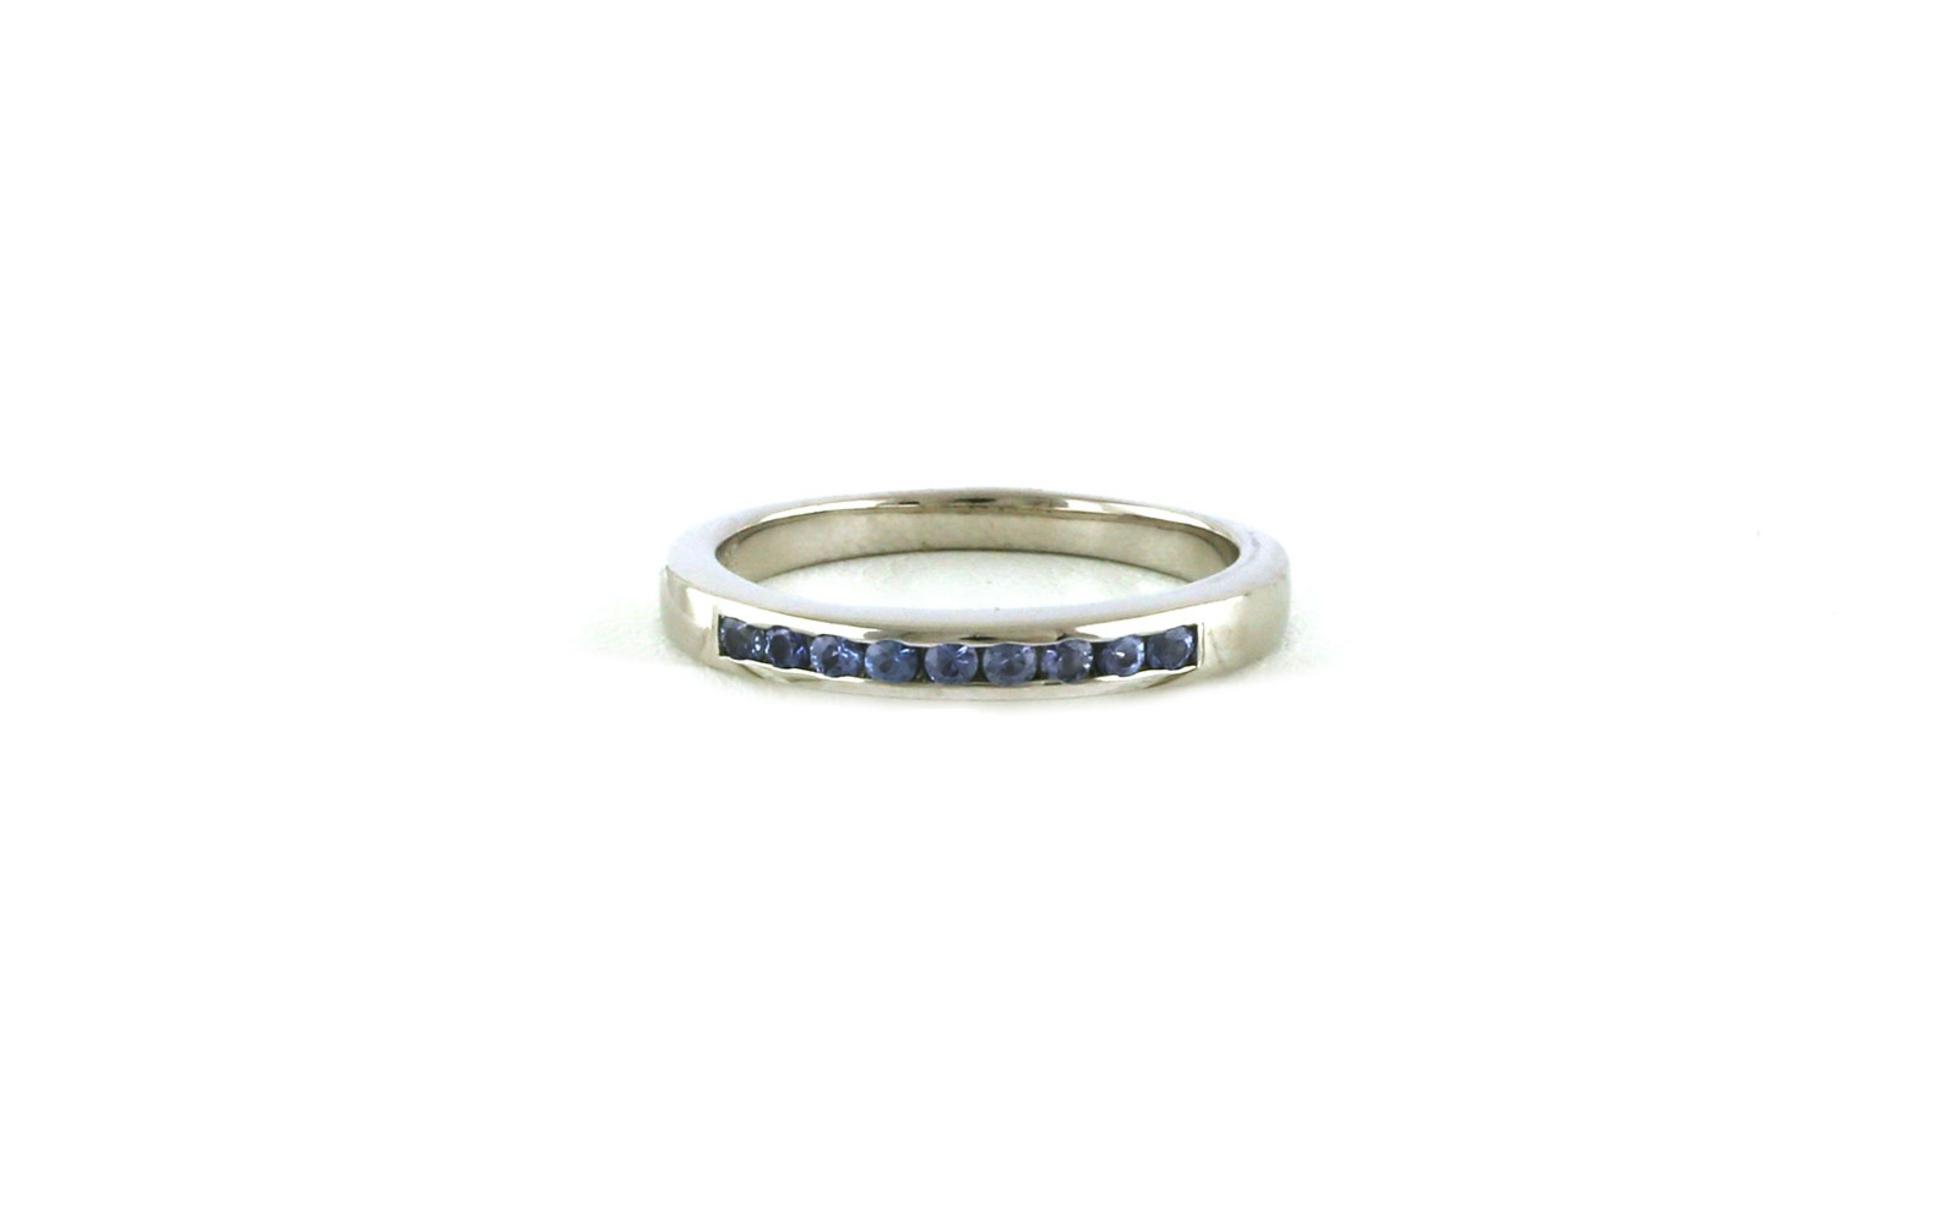 7-Stone Channel-set Montana Yogo Sapphire Ring in Sterling Silver (0.33cts TWT)